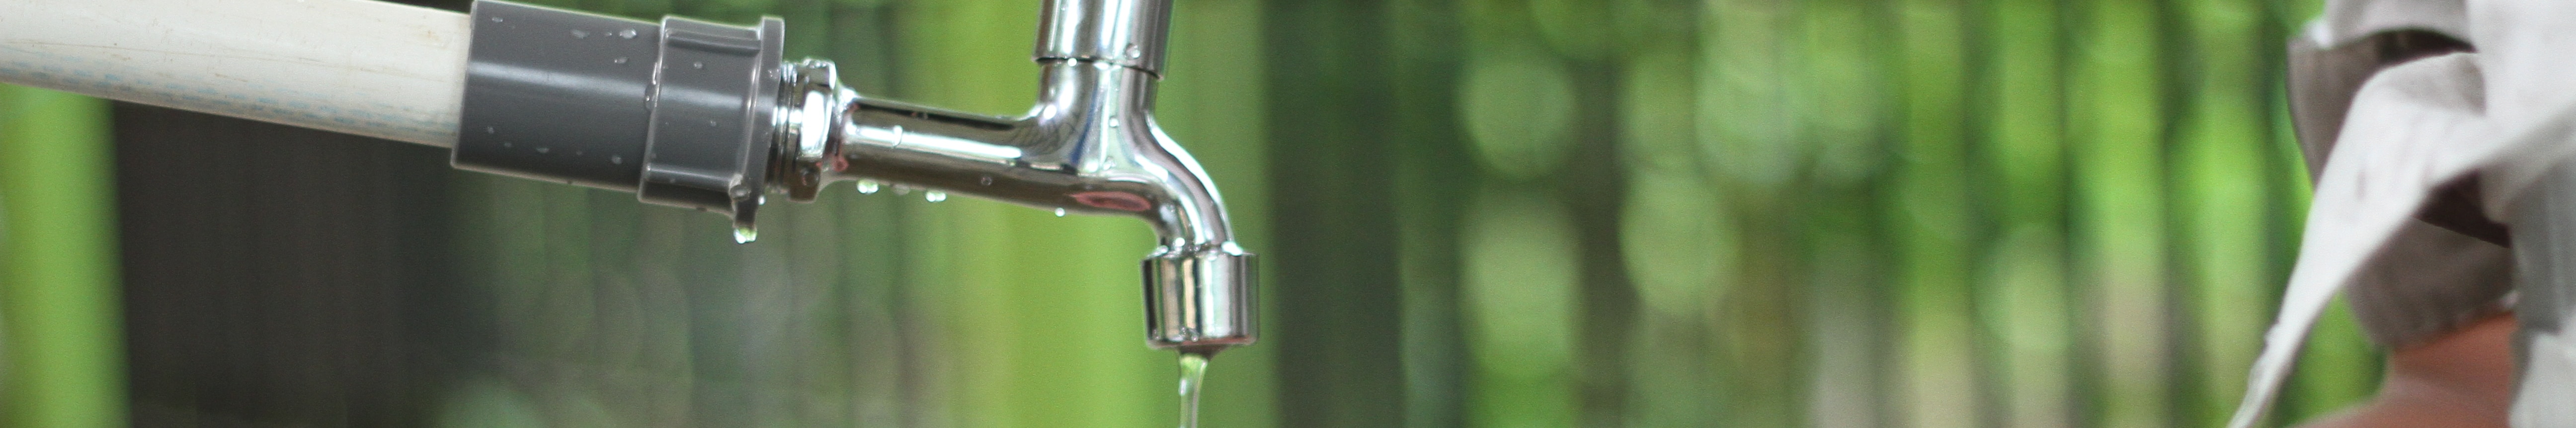 United Utilities is providing clean water to 7.3 Mn customers in the United Kingdom